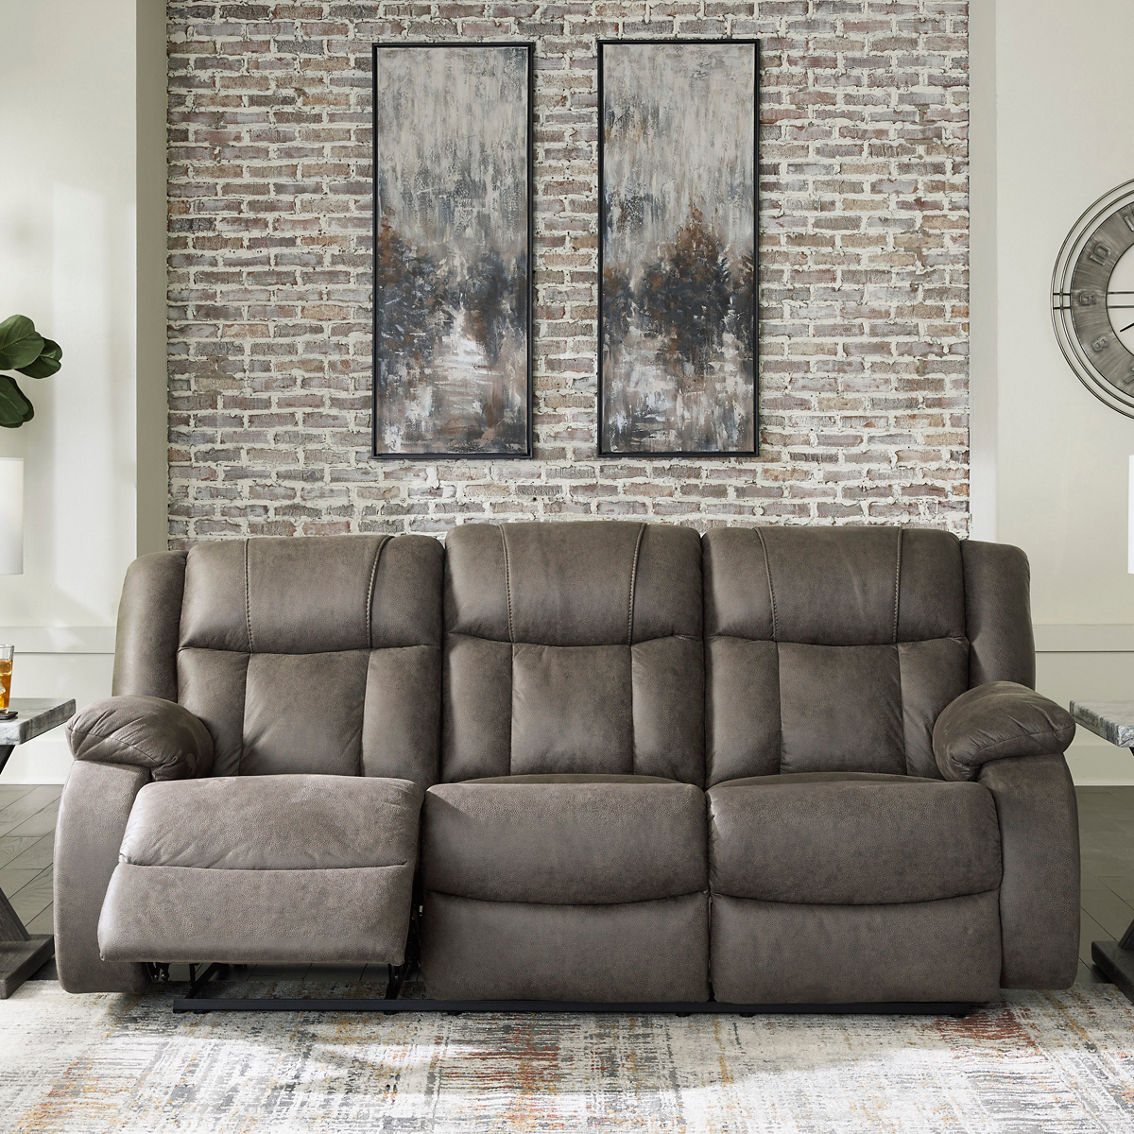 Signature Design by Ashley First Base 3 pc. Reclining Set: Sofa, Loveseat, Recliner - Image 2 of 4